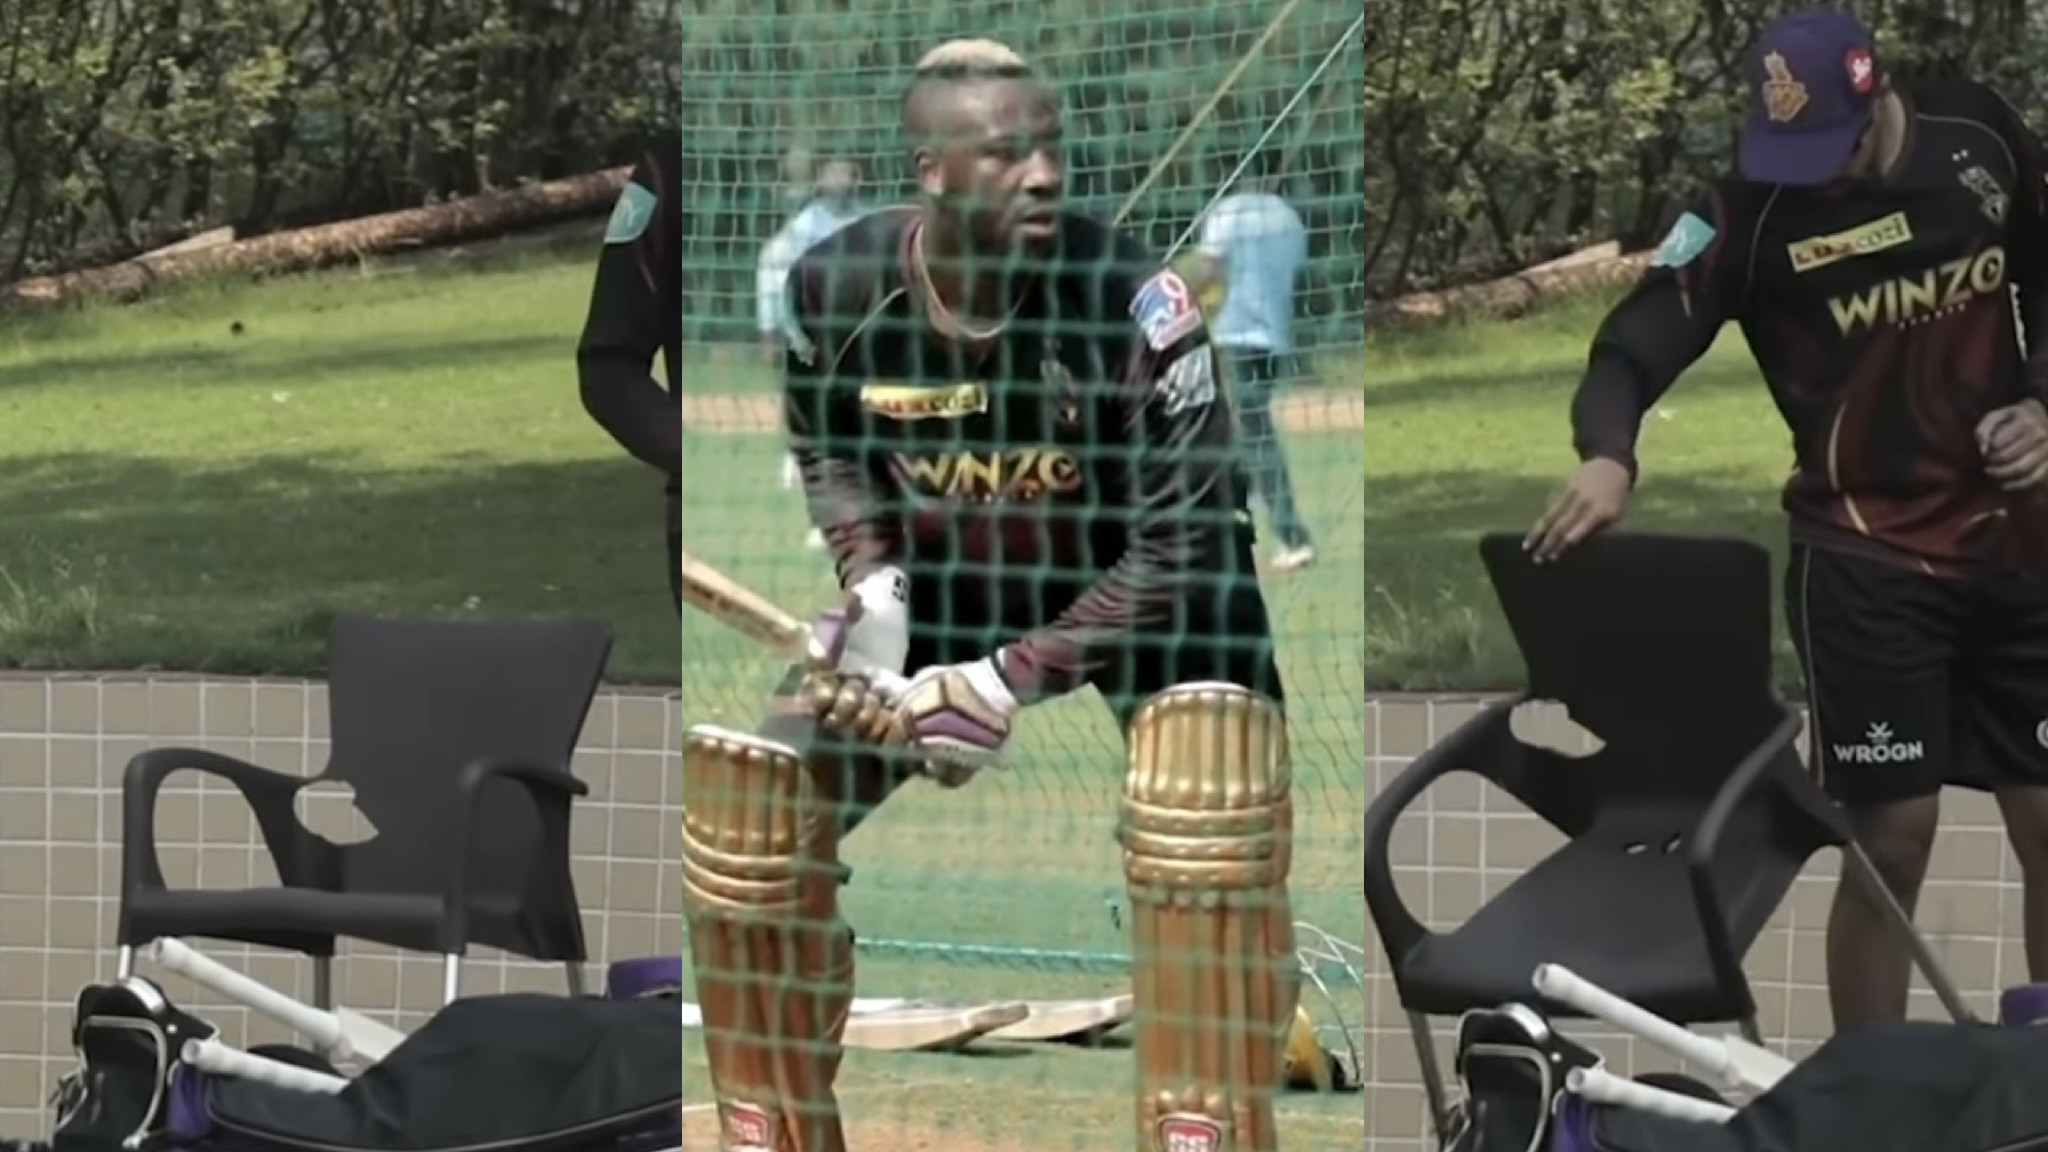 IPL 2022: WATCH - Andre Russell breaks chair with his brutal hitting in KKR's net session 